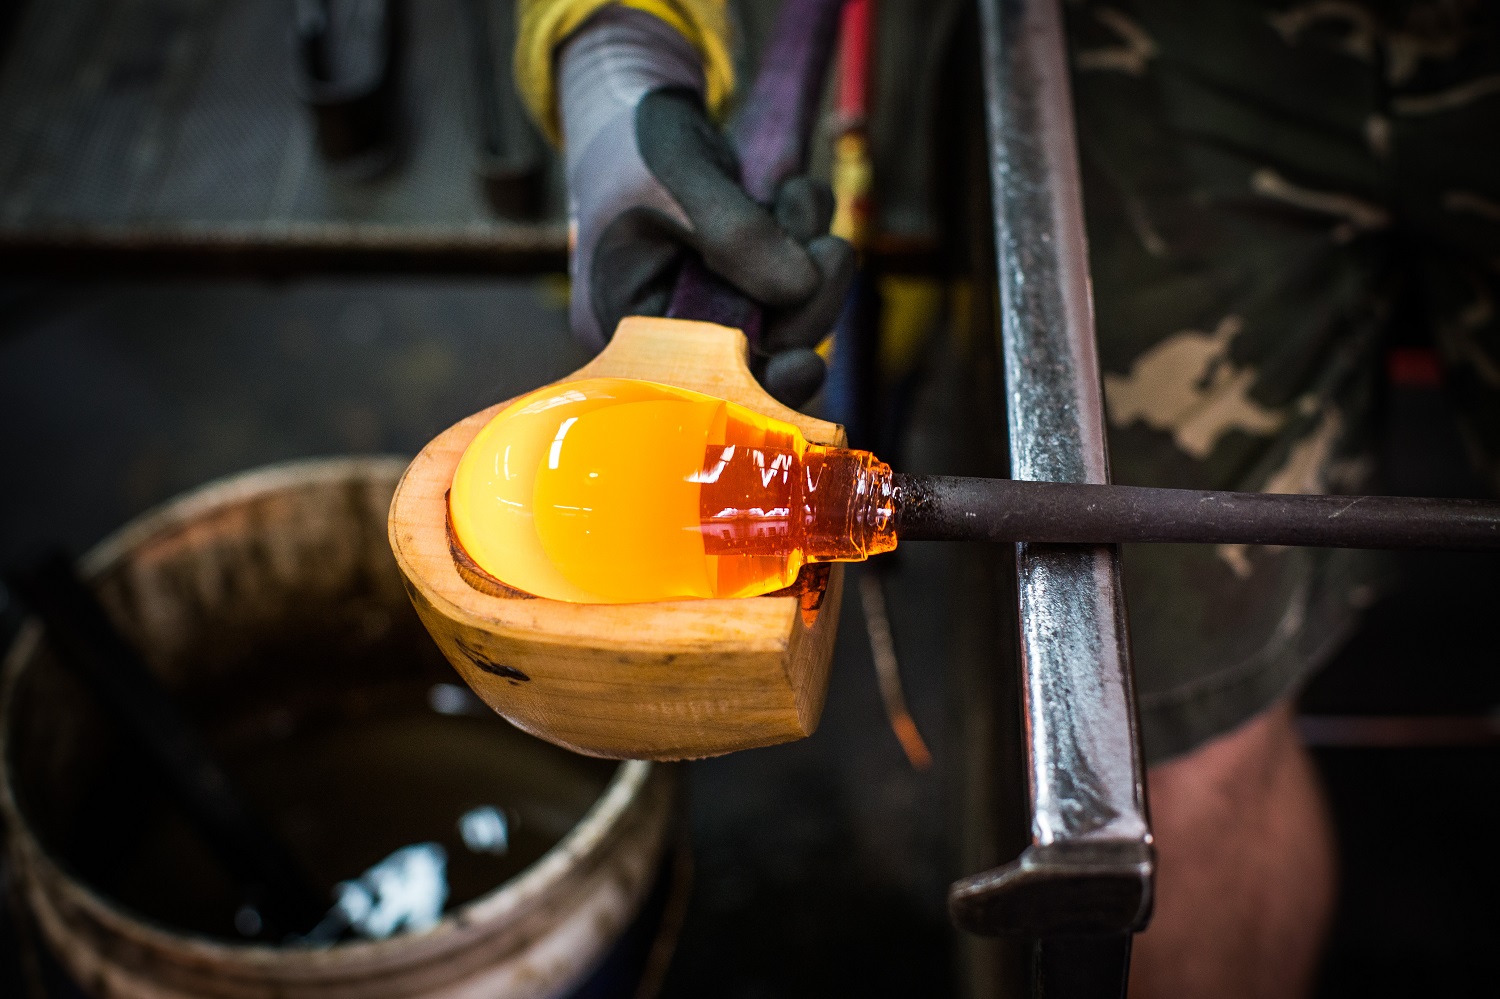 Molten glass as its shaped into a handblown glass product